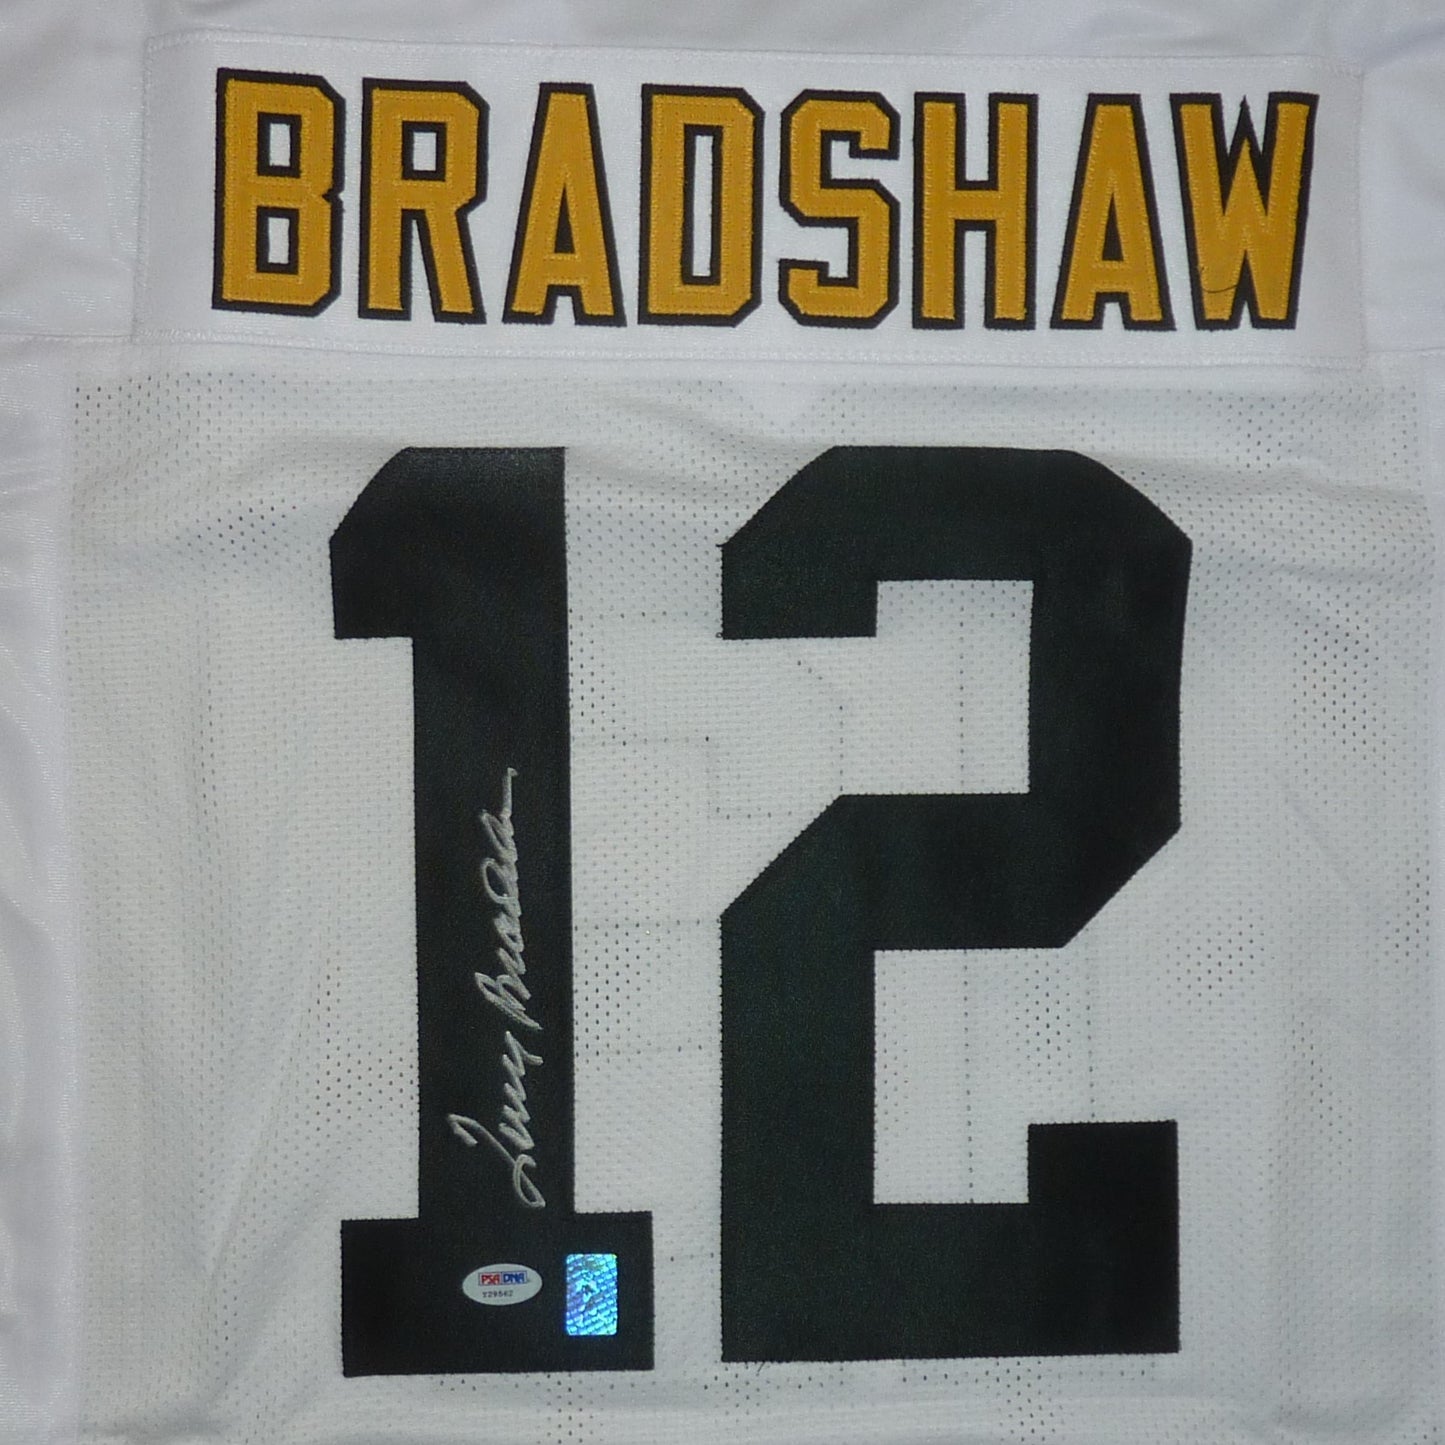 Terry Bradshaw Autographed Pittsburgh (White #12) Custom Jersey